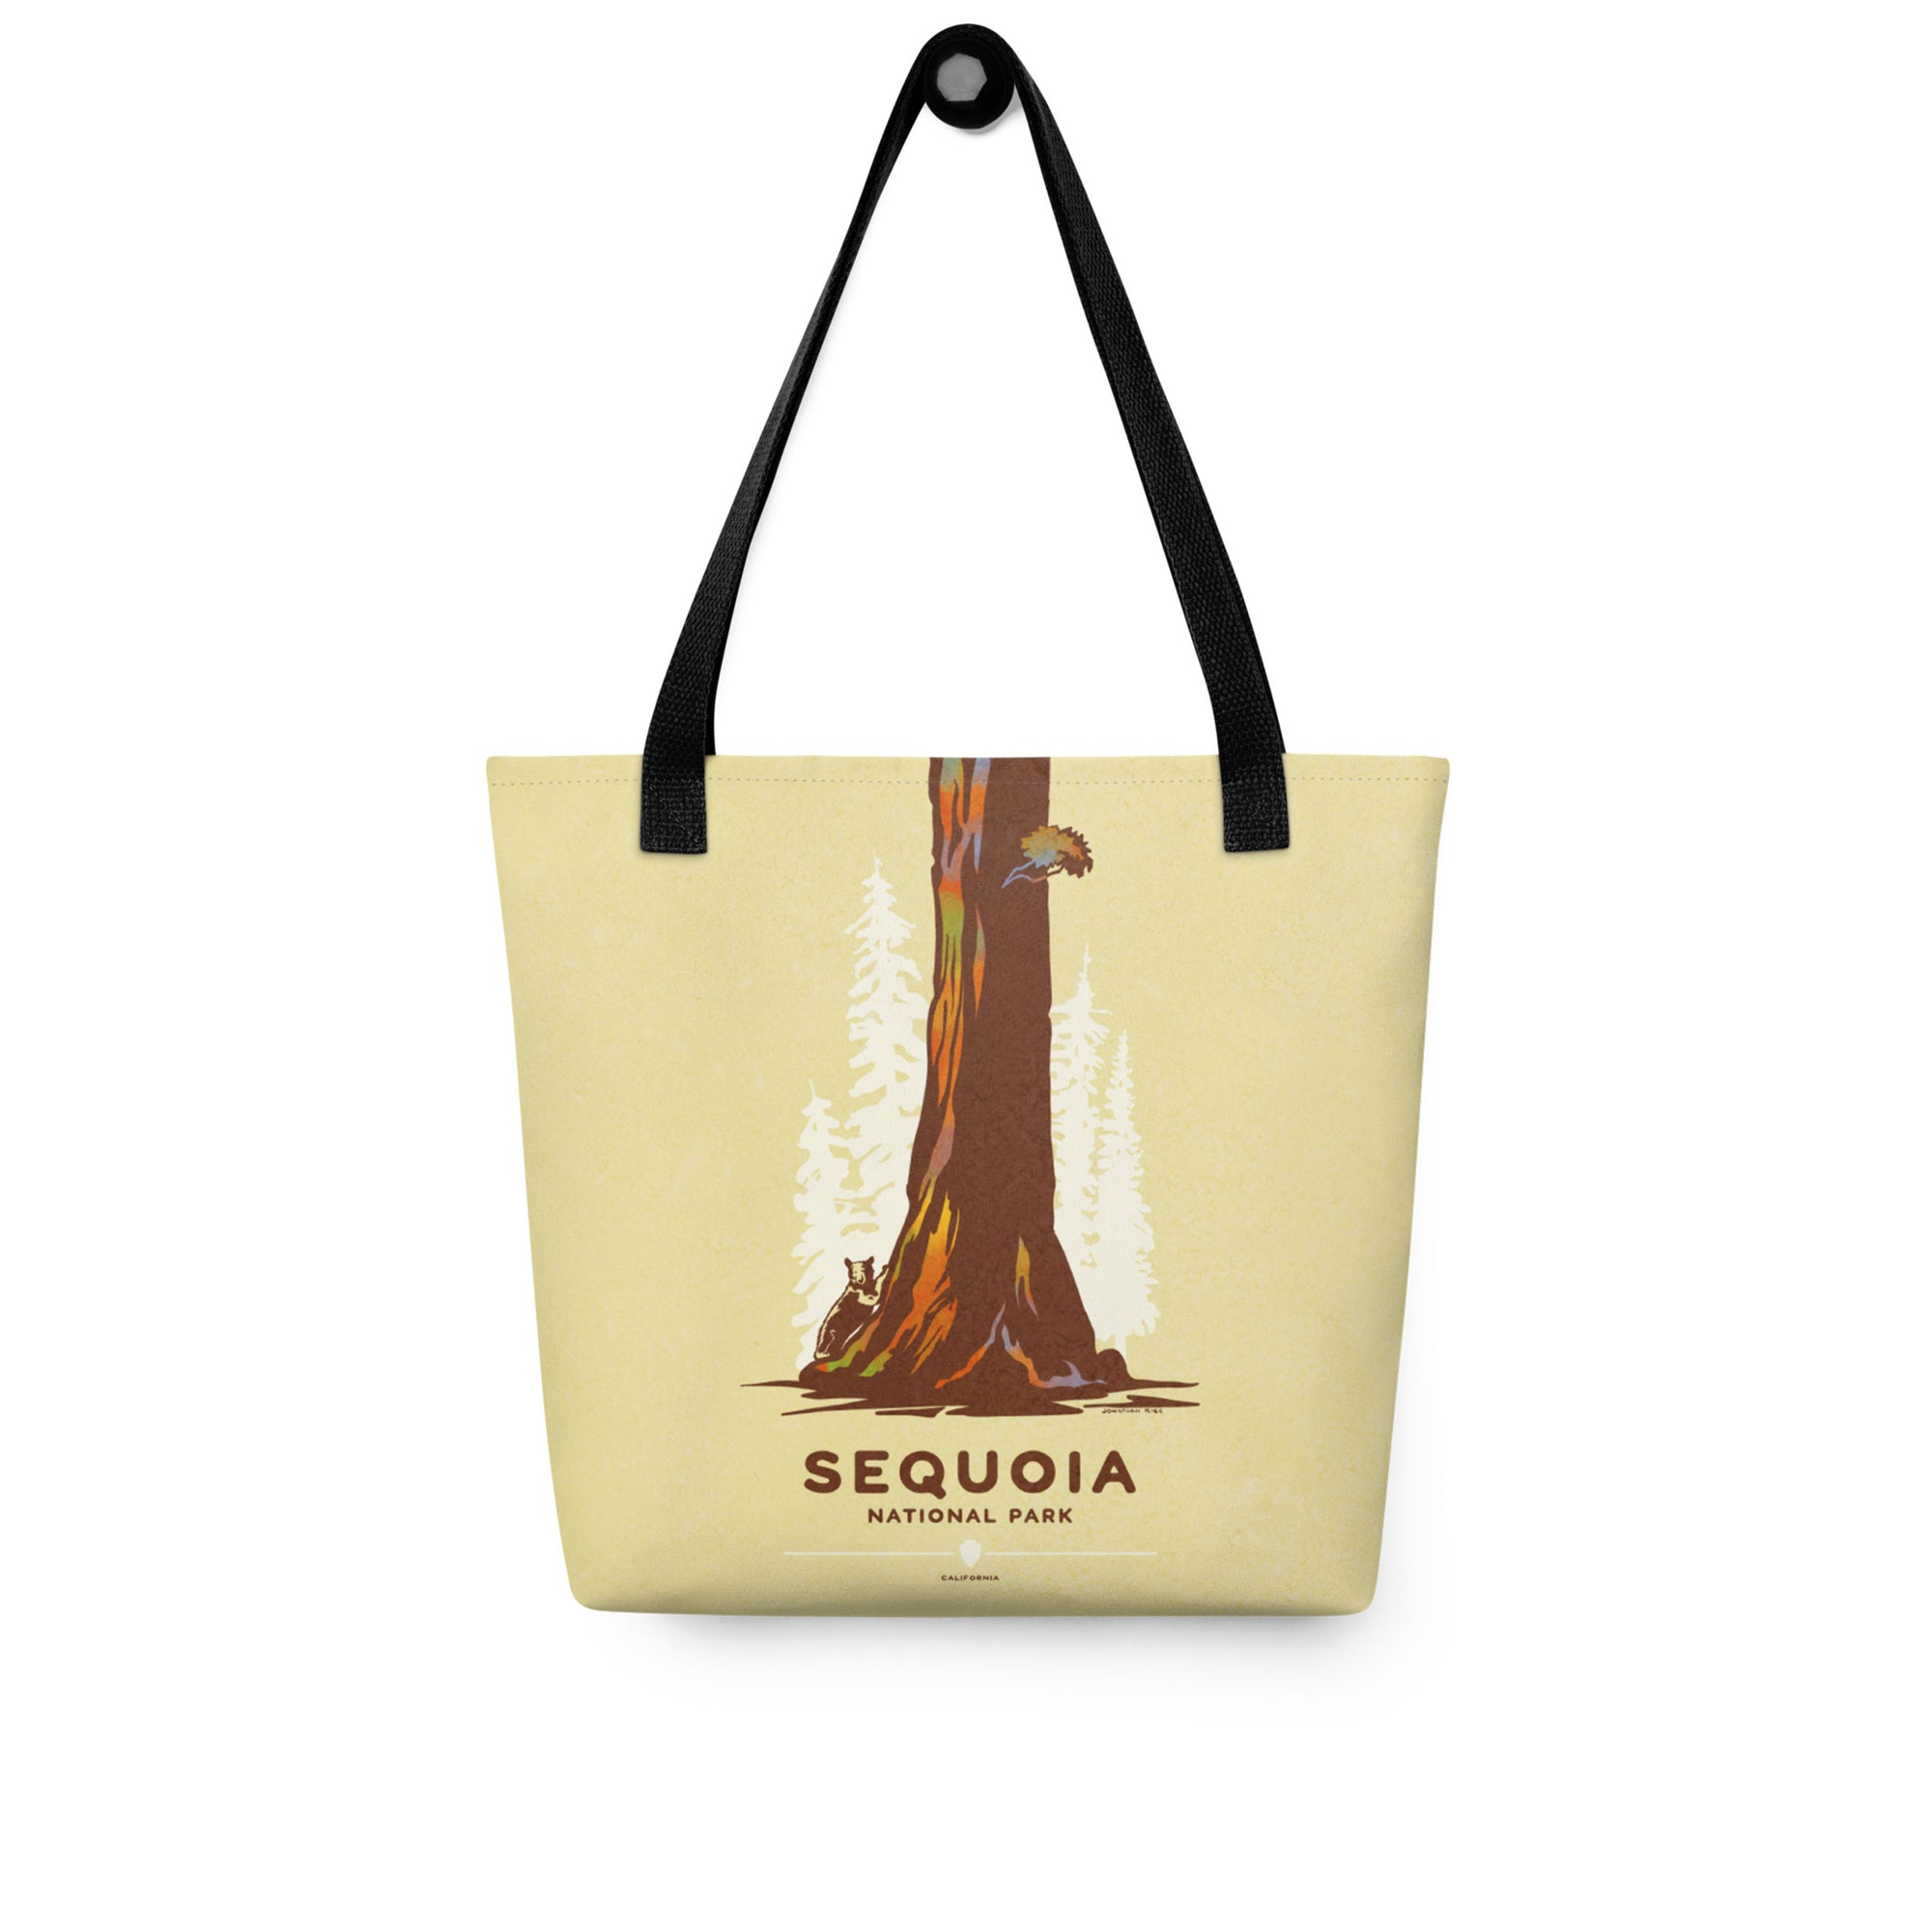 A spacious and trendy tote bag with original art by Jonathan Rice of Sequoia National Park in California.  This classy bag depicts a giant Sequoia tree with a black bear attempting to climb it. Bag is 15” x 15” with a 11.8” handle and carry a maximum weight of 44 lbs. It makes a great gift for friends, family and National Park lovers. 